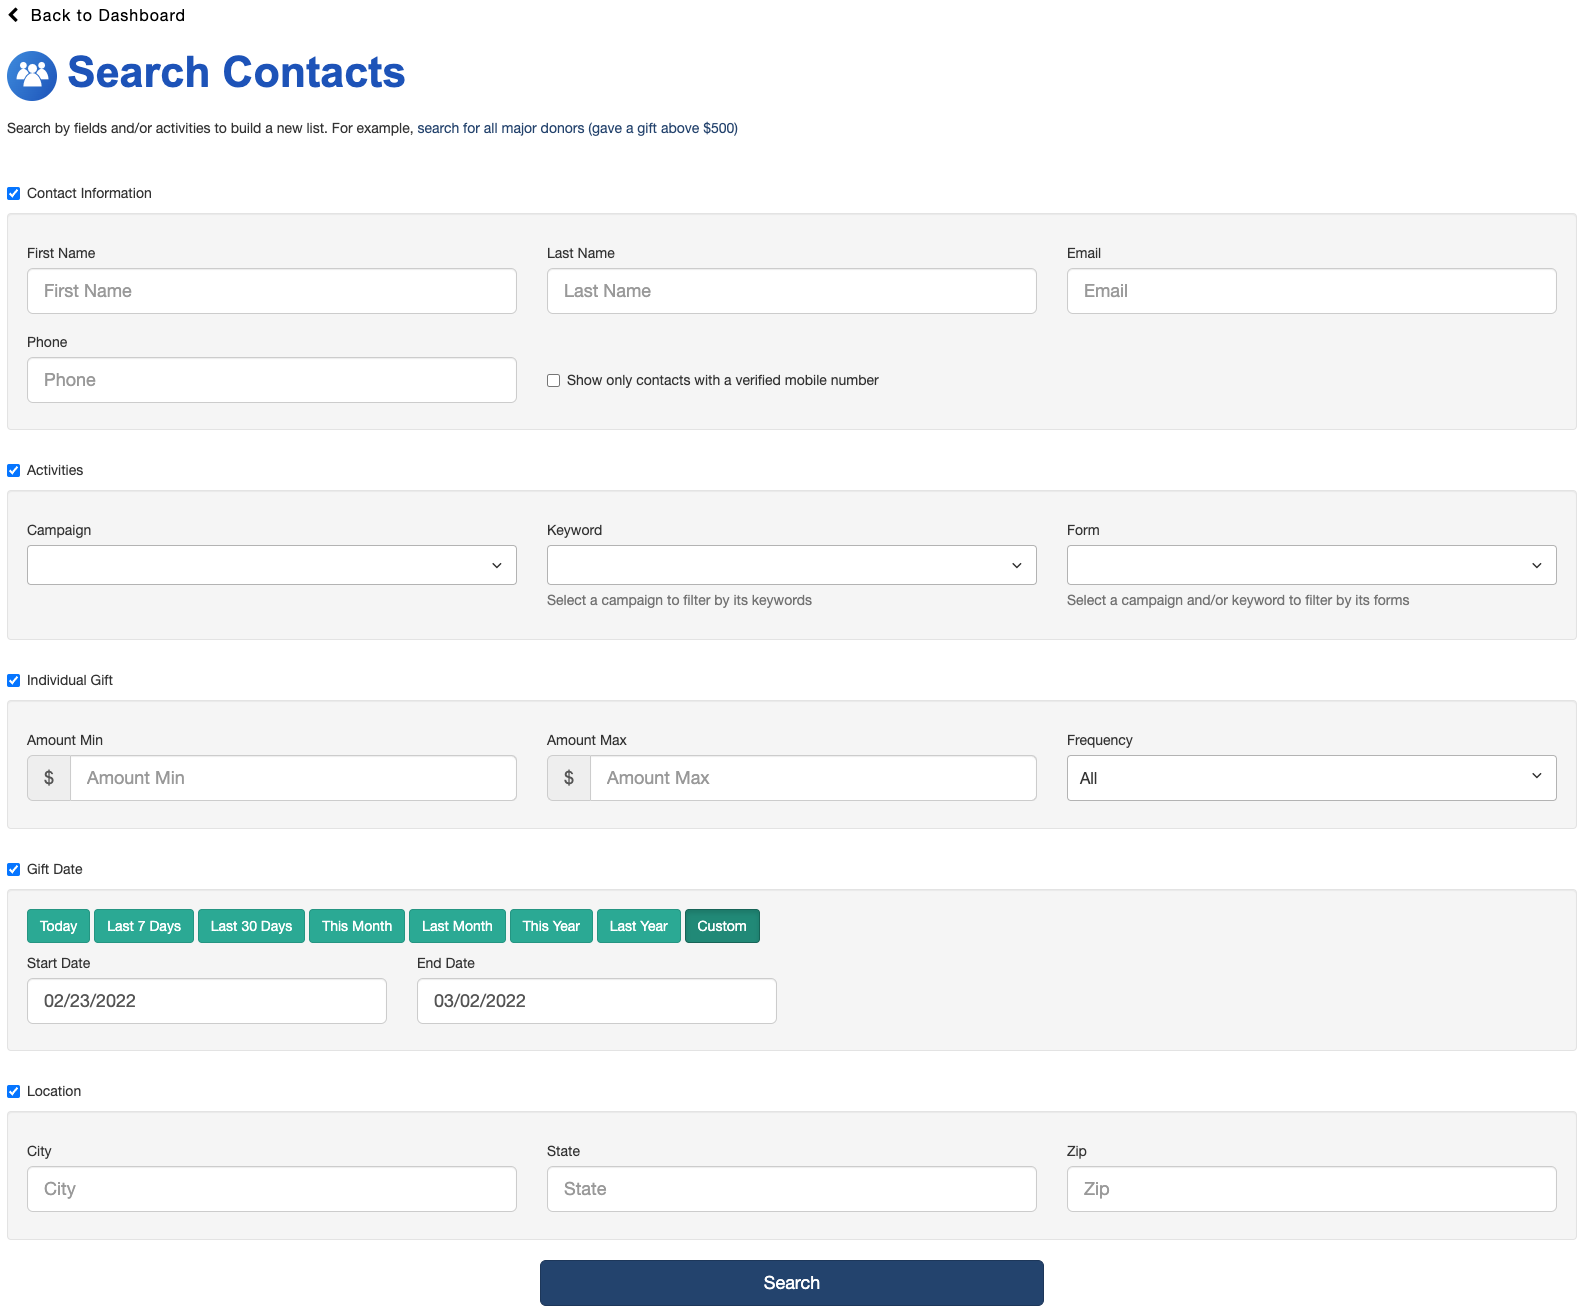 Search Contacts